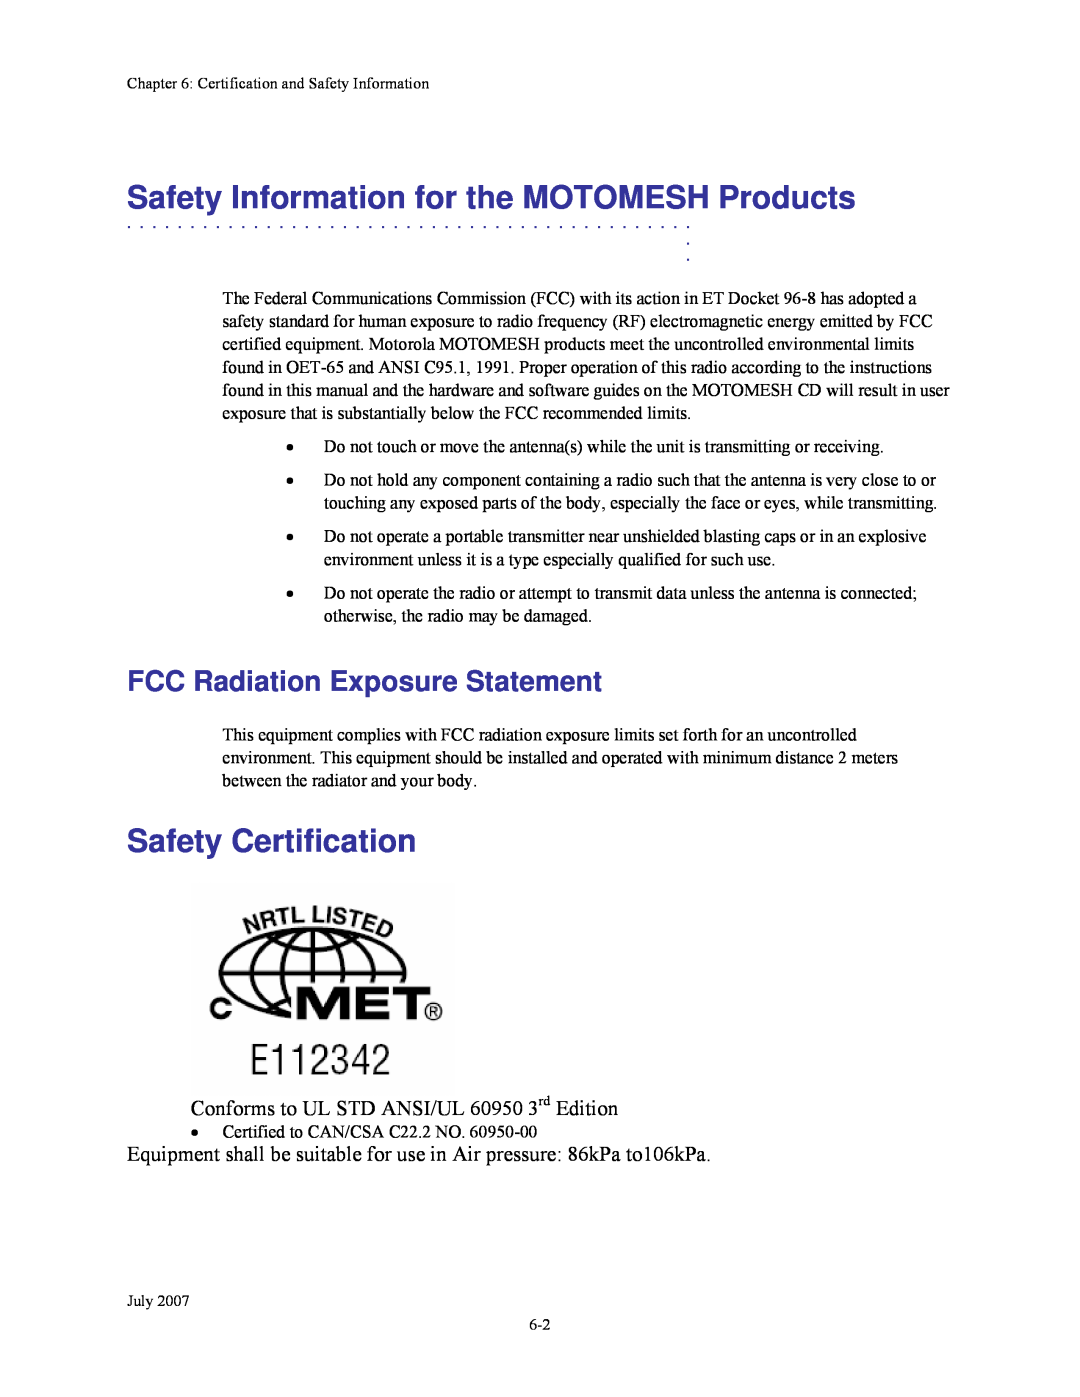 Nikon 4300 manual Safety Information for the MOTOMESH Products, Safety Certification, FCC Radiation Exposure Statement 